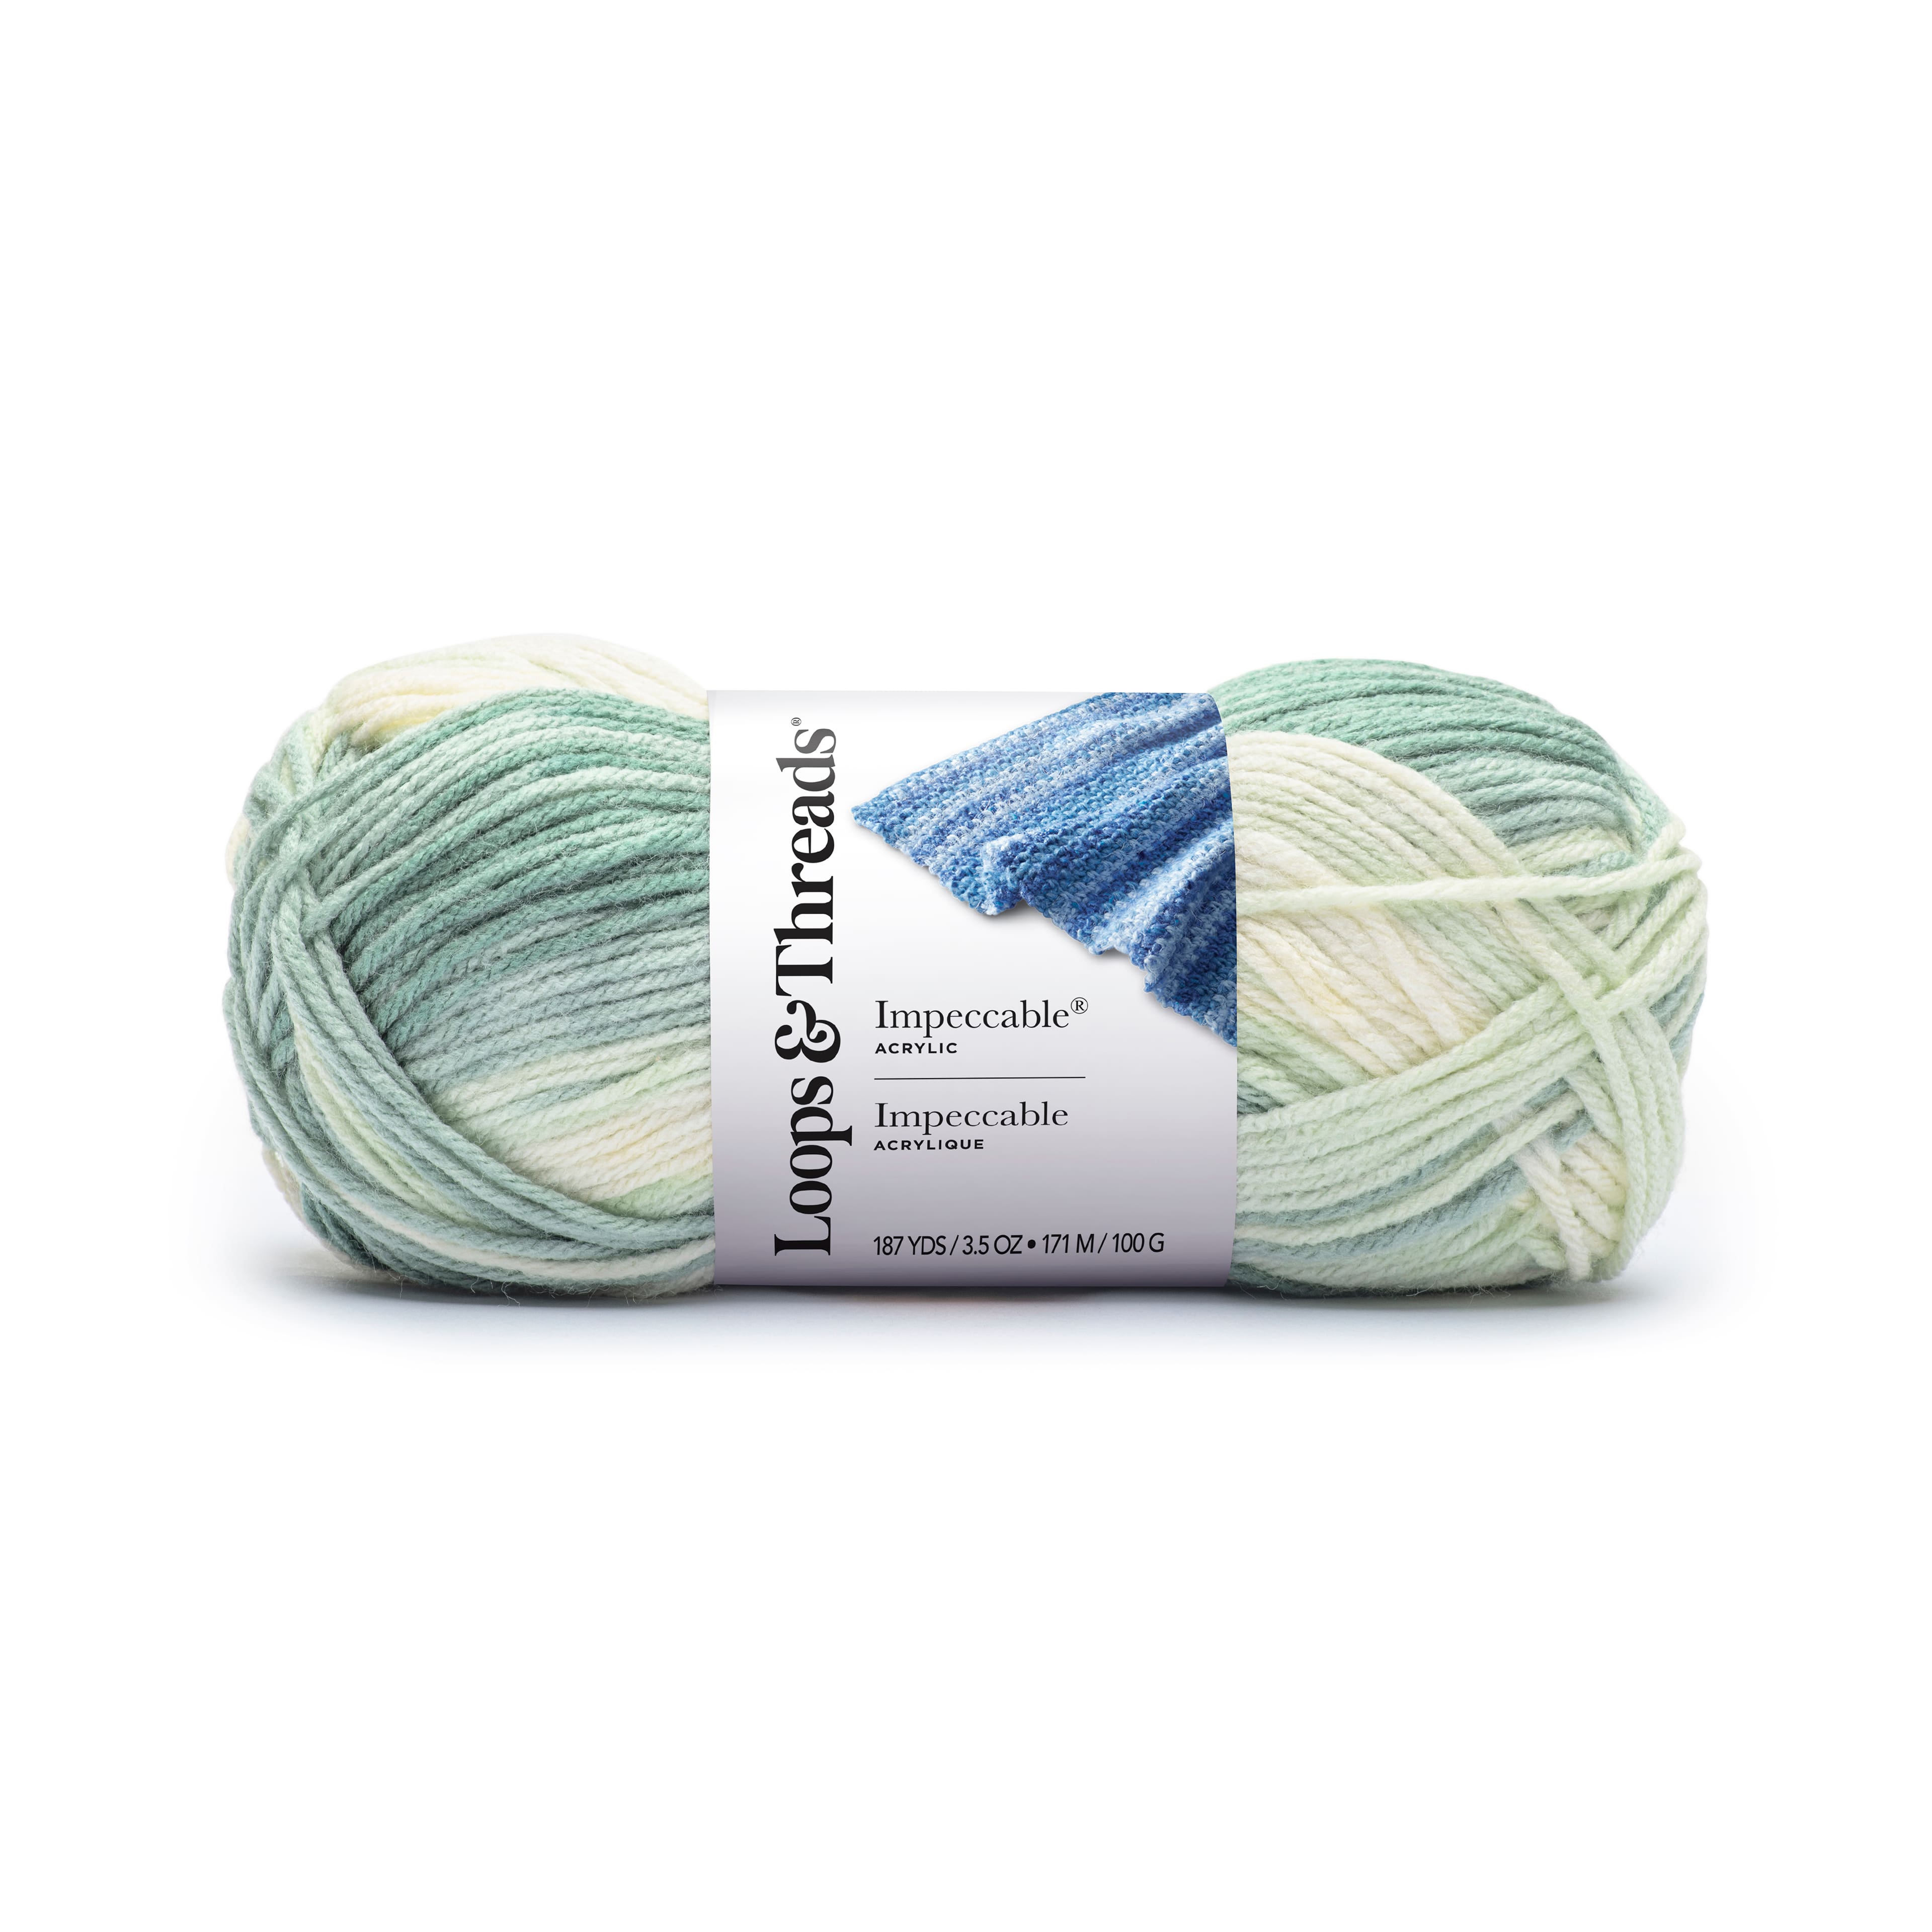 Pastel Yarn, a better picture of the yarn i received from a…